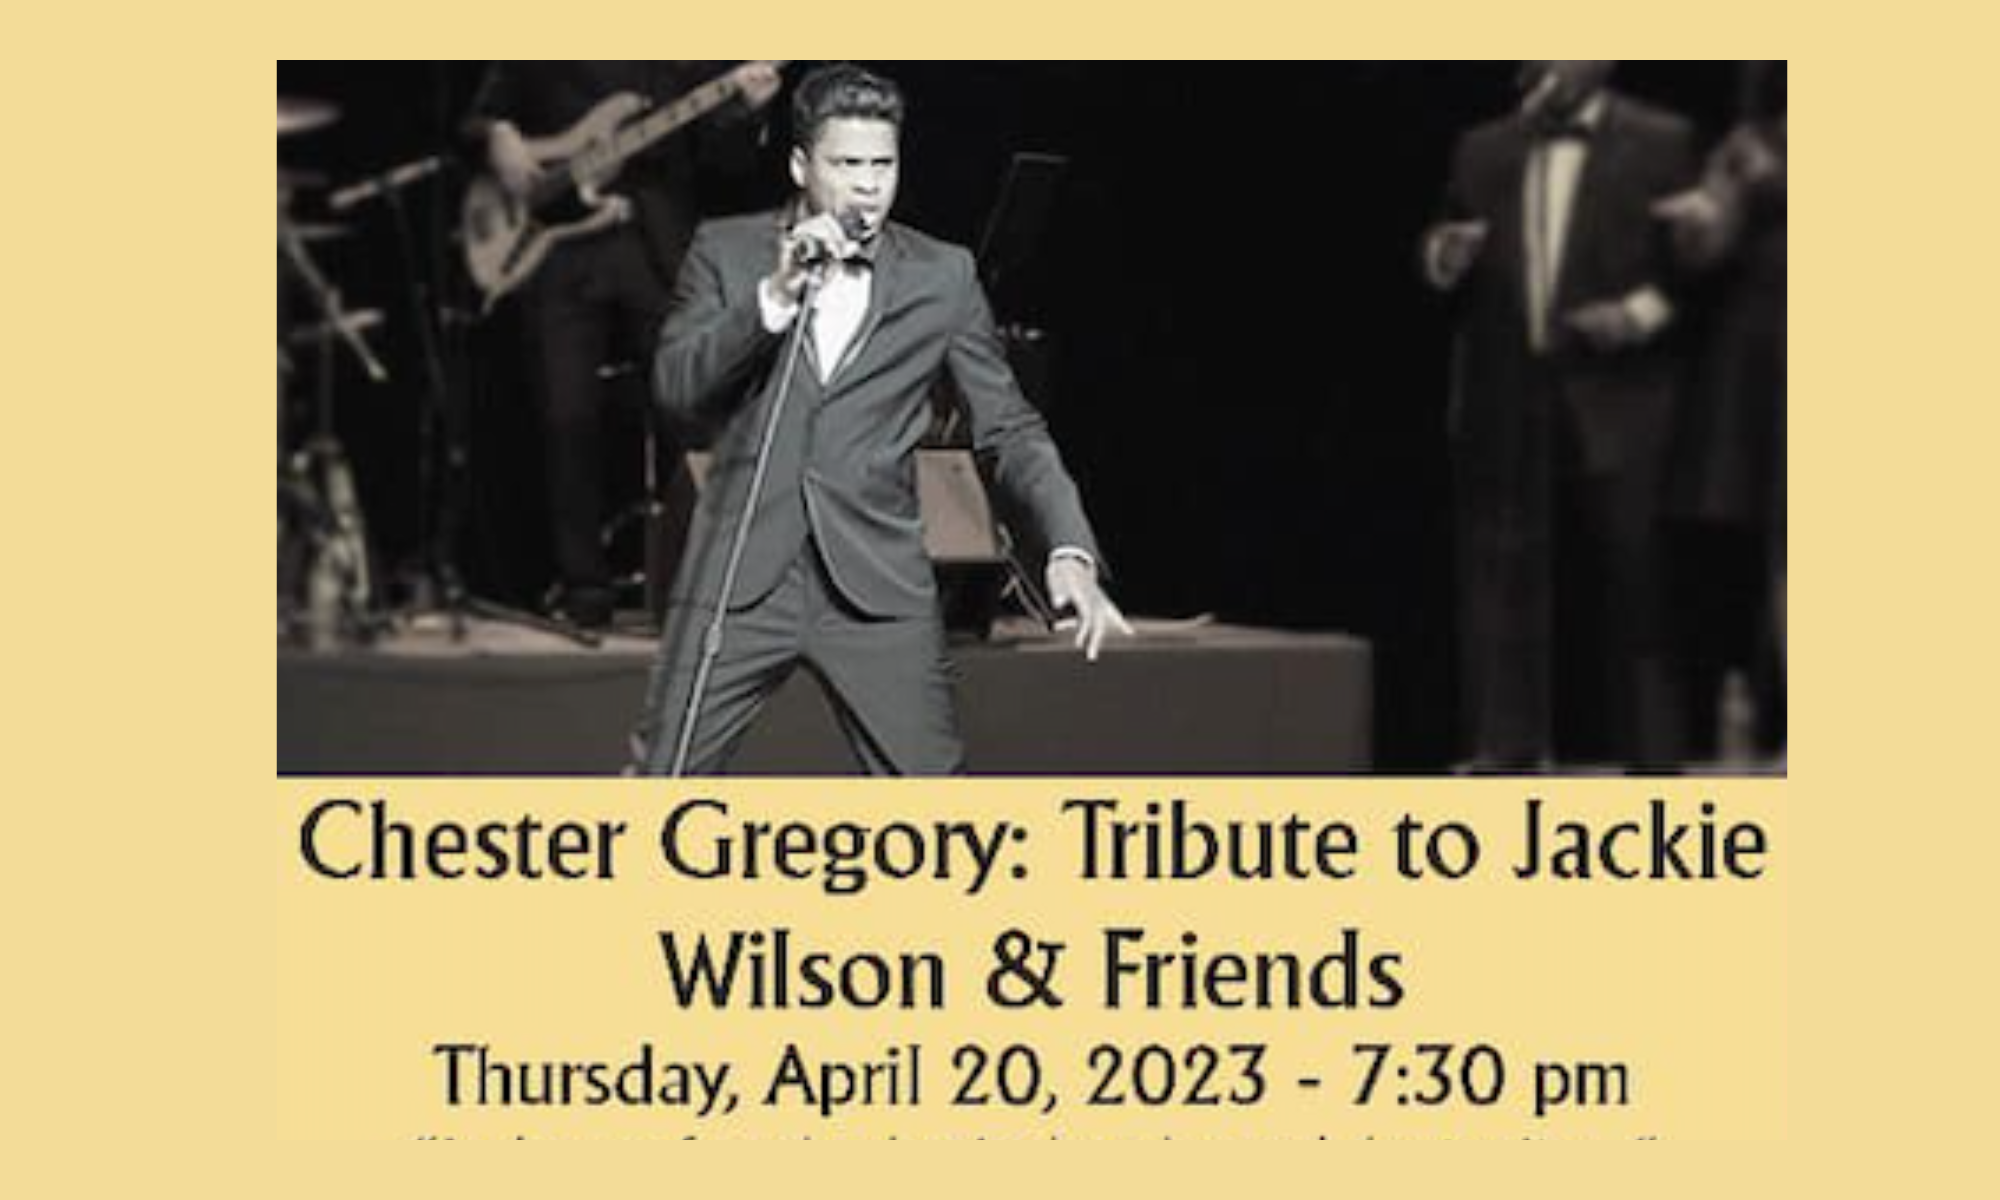 Chester Gregory: Tribute to Jackie Wilson & Friends